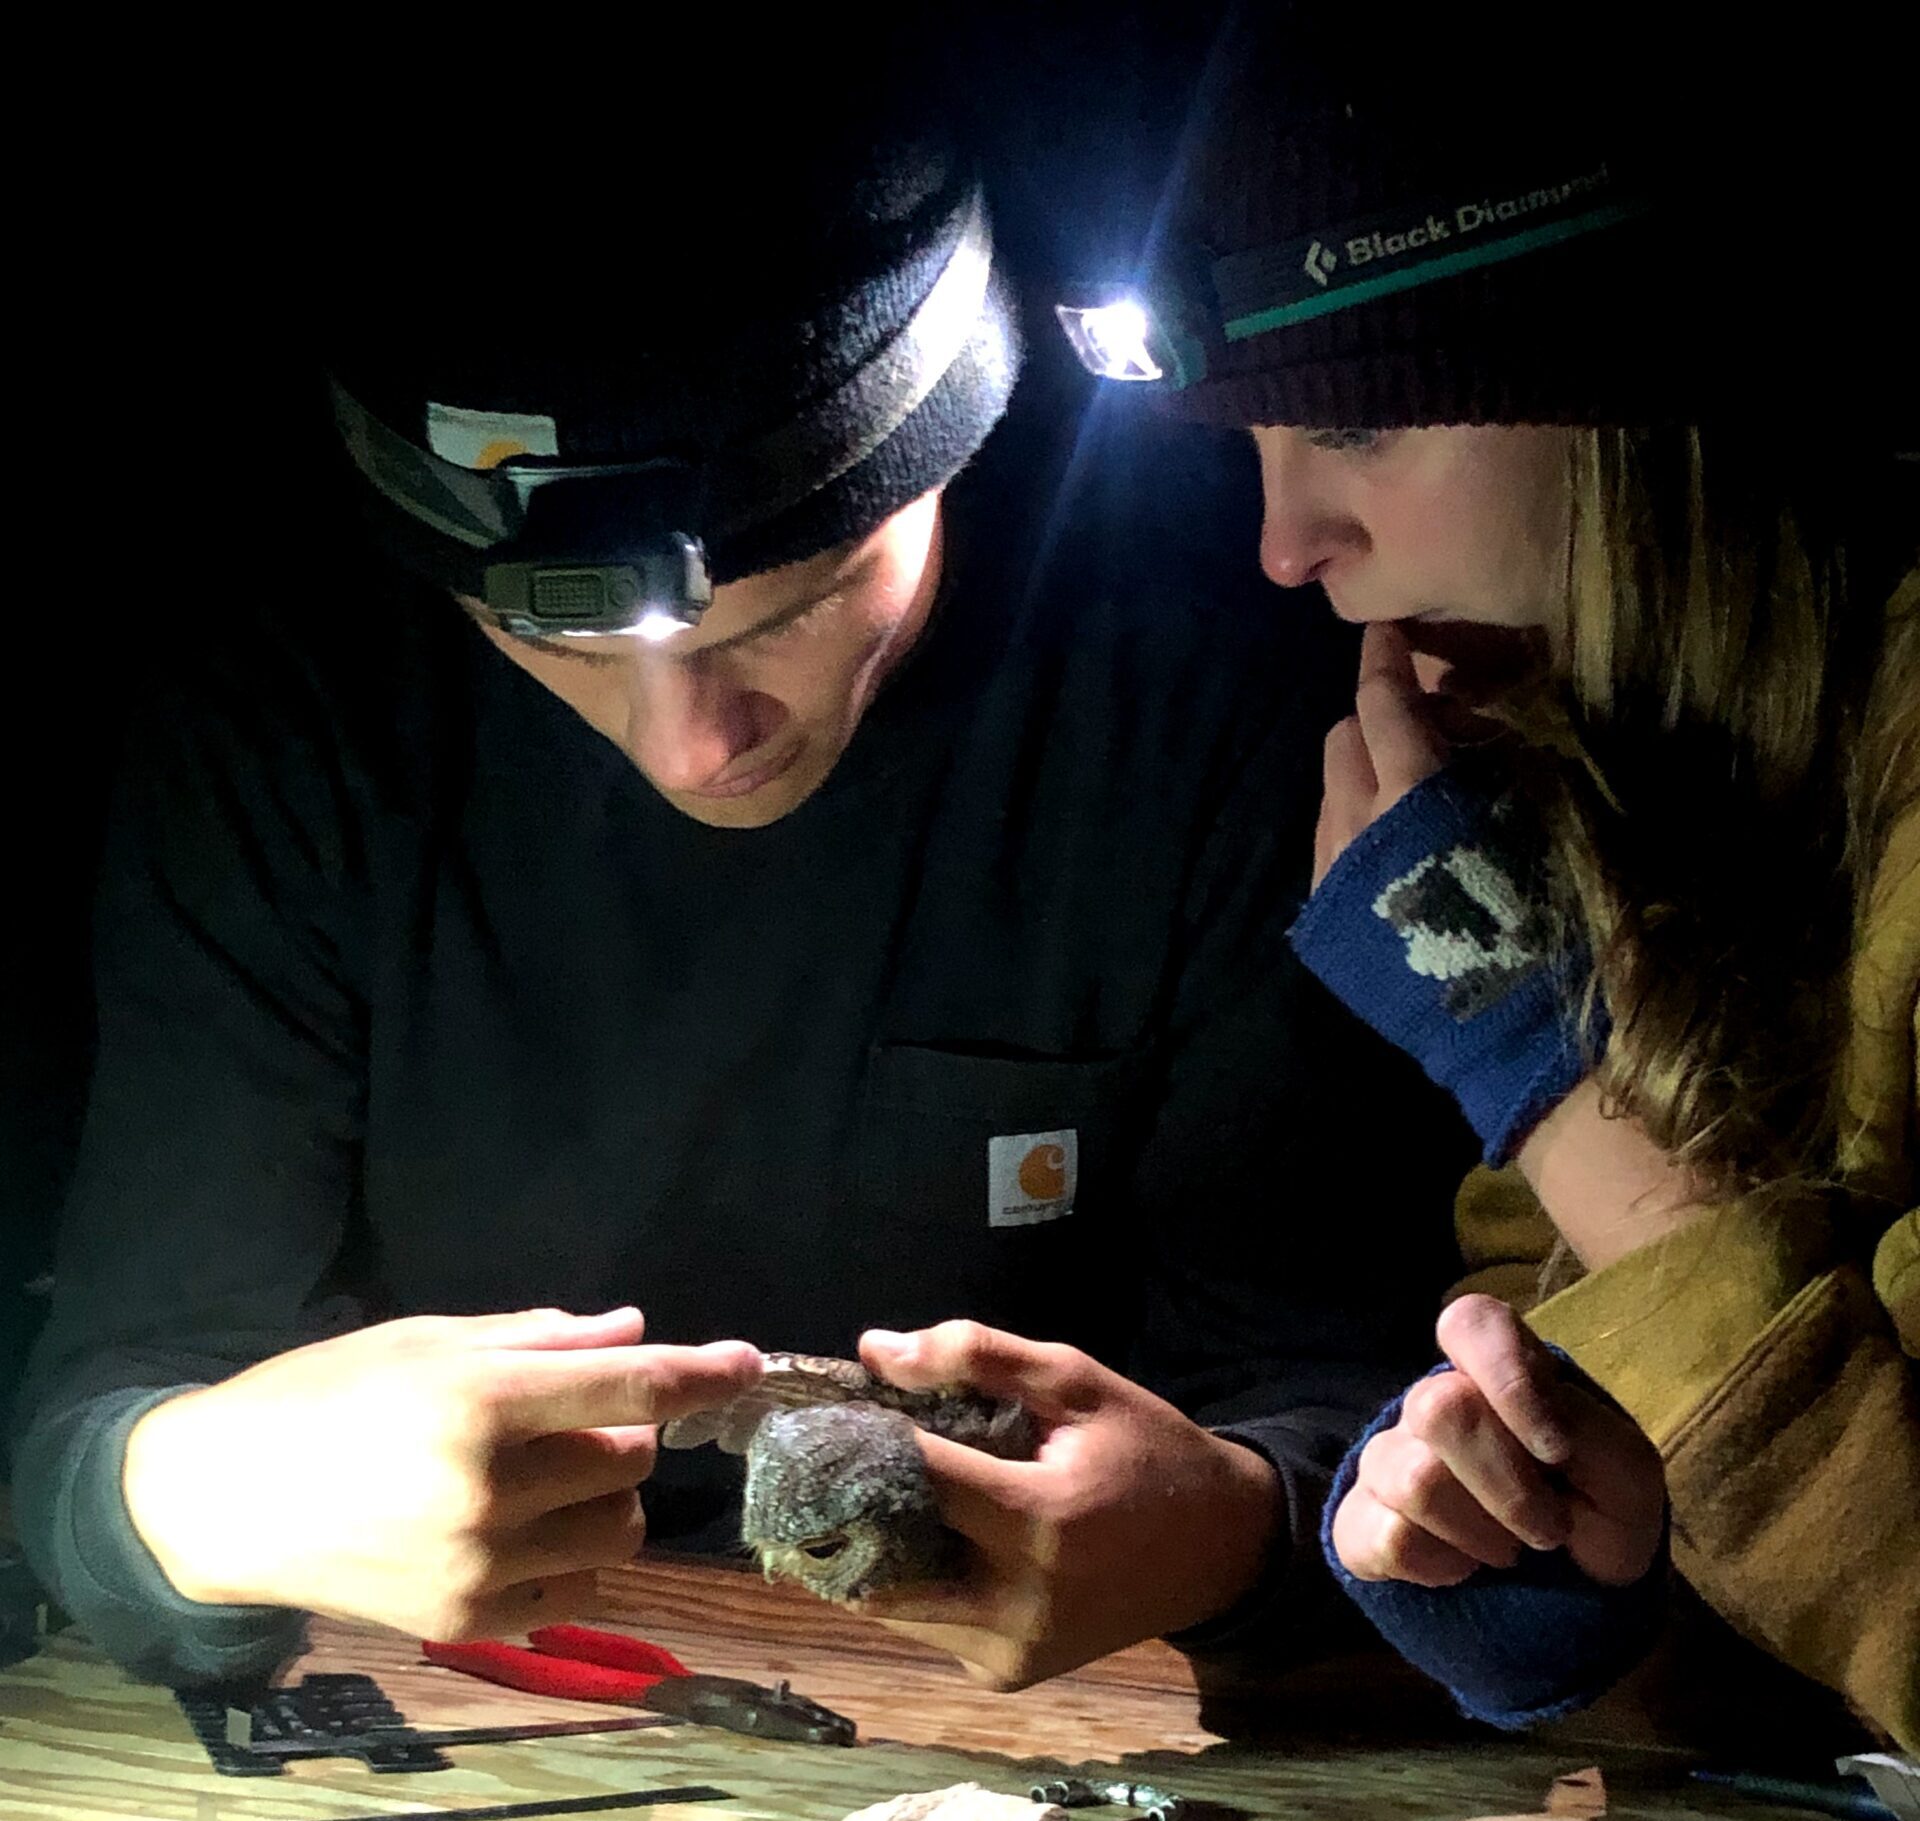 Two owl banders are looking closely at a small brown owl one of them is gently holding with its wing extended. Their headlamps are casting a glow on the owl and the surrounding banding table they are leaning on.